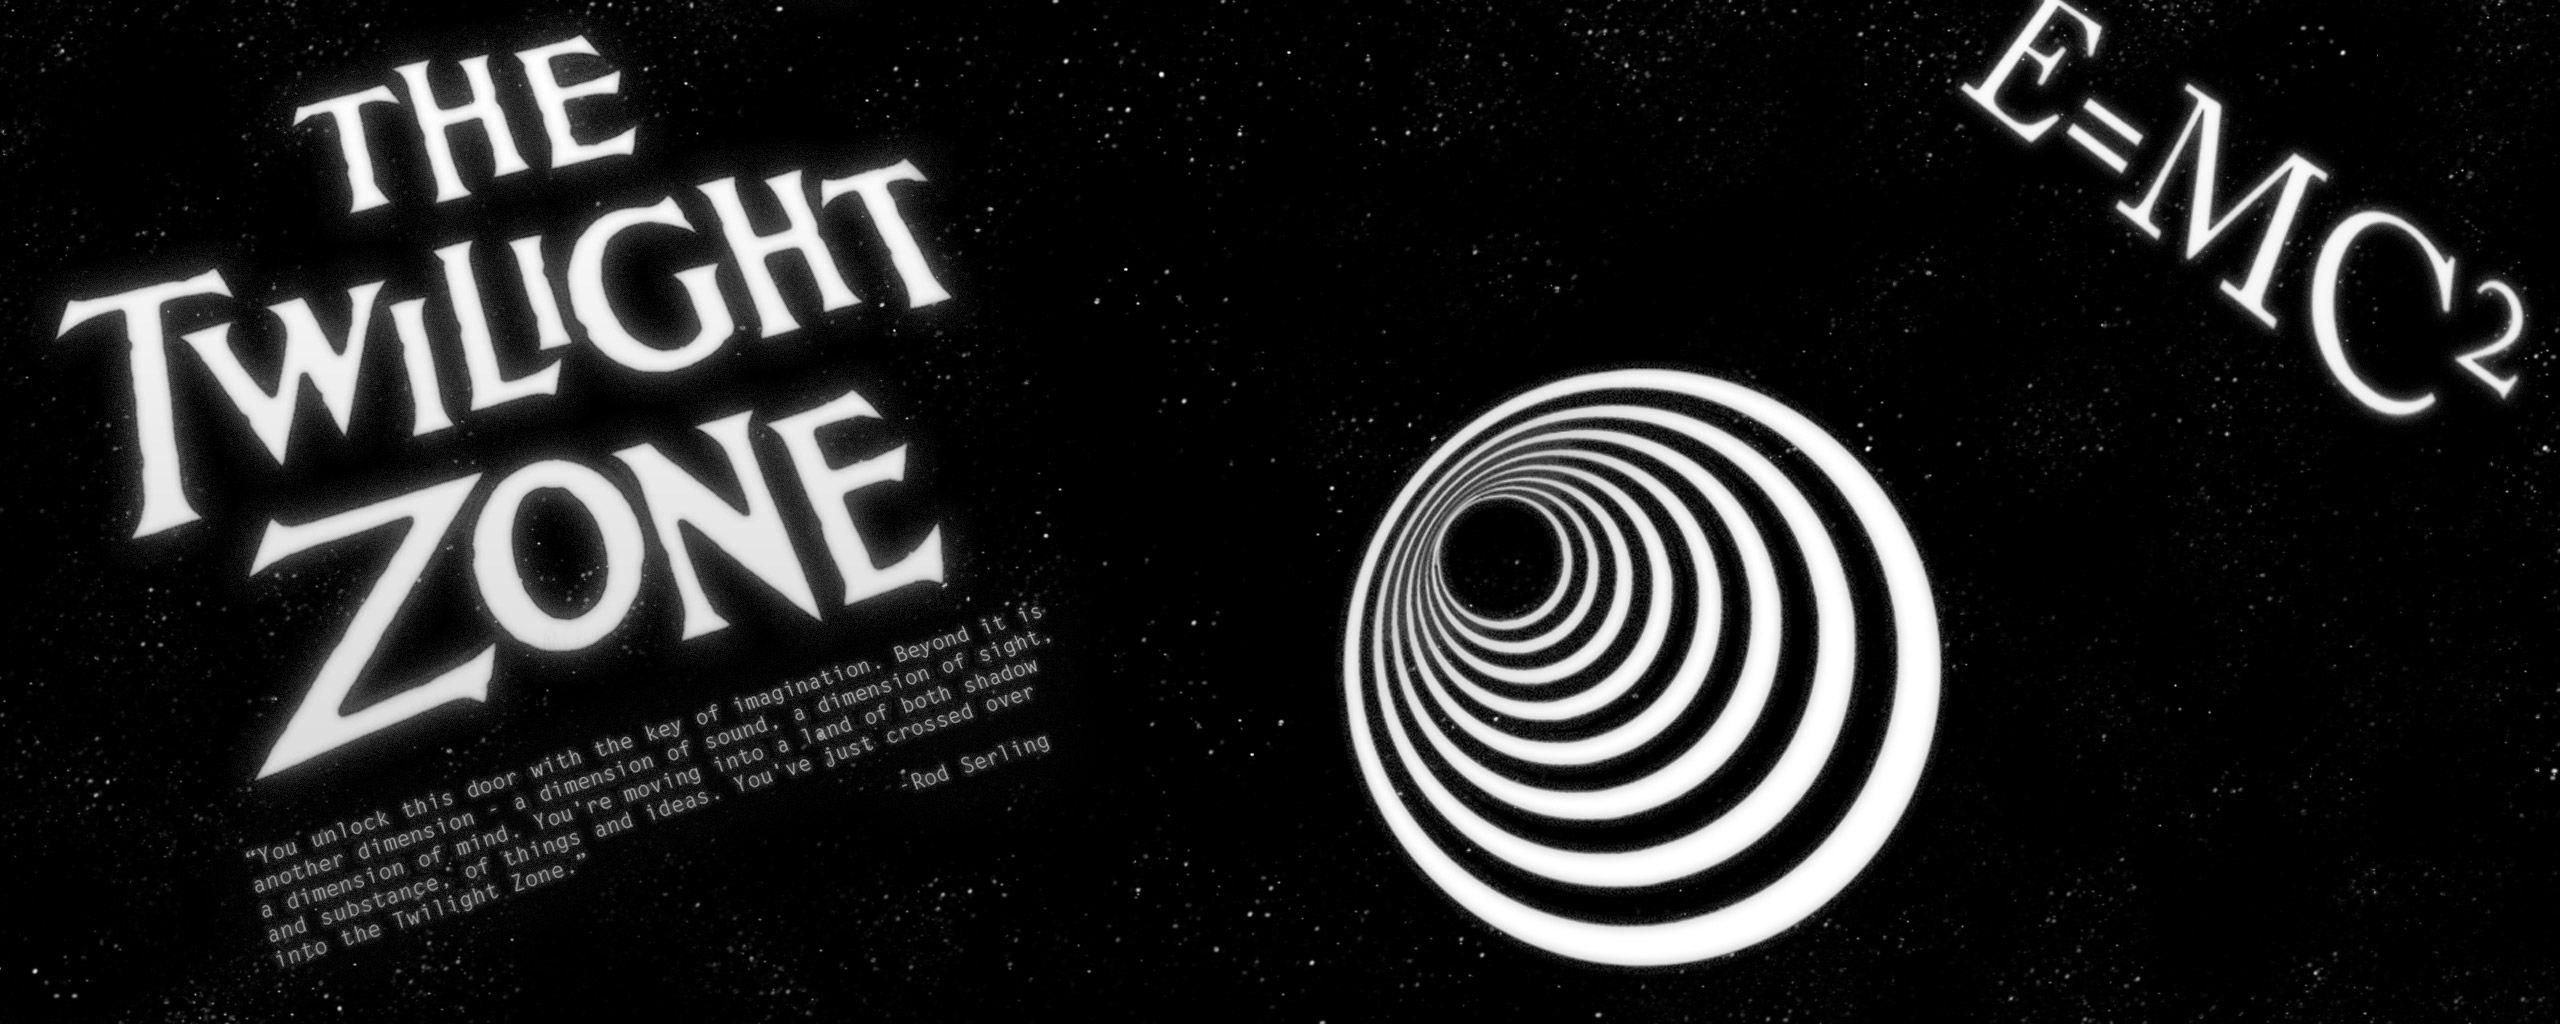 twilight zone Wallpaper and Background Imagex1024